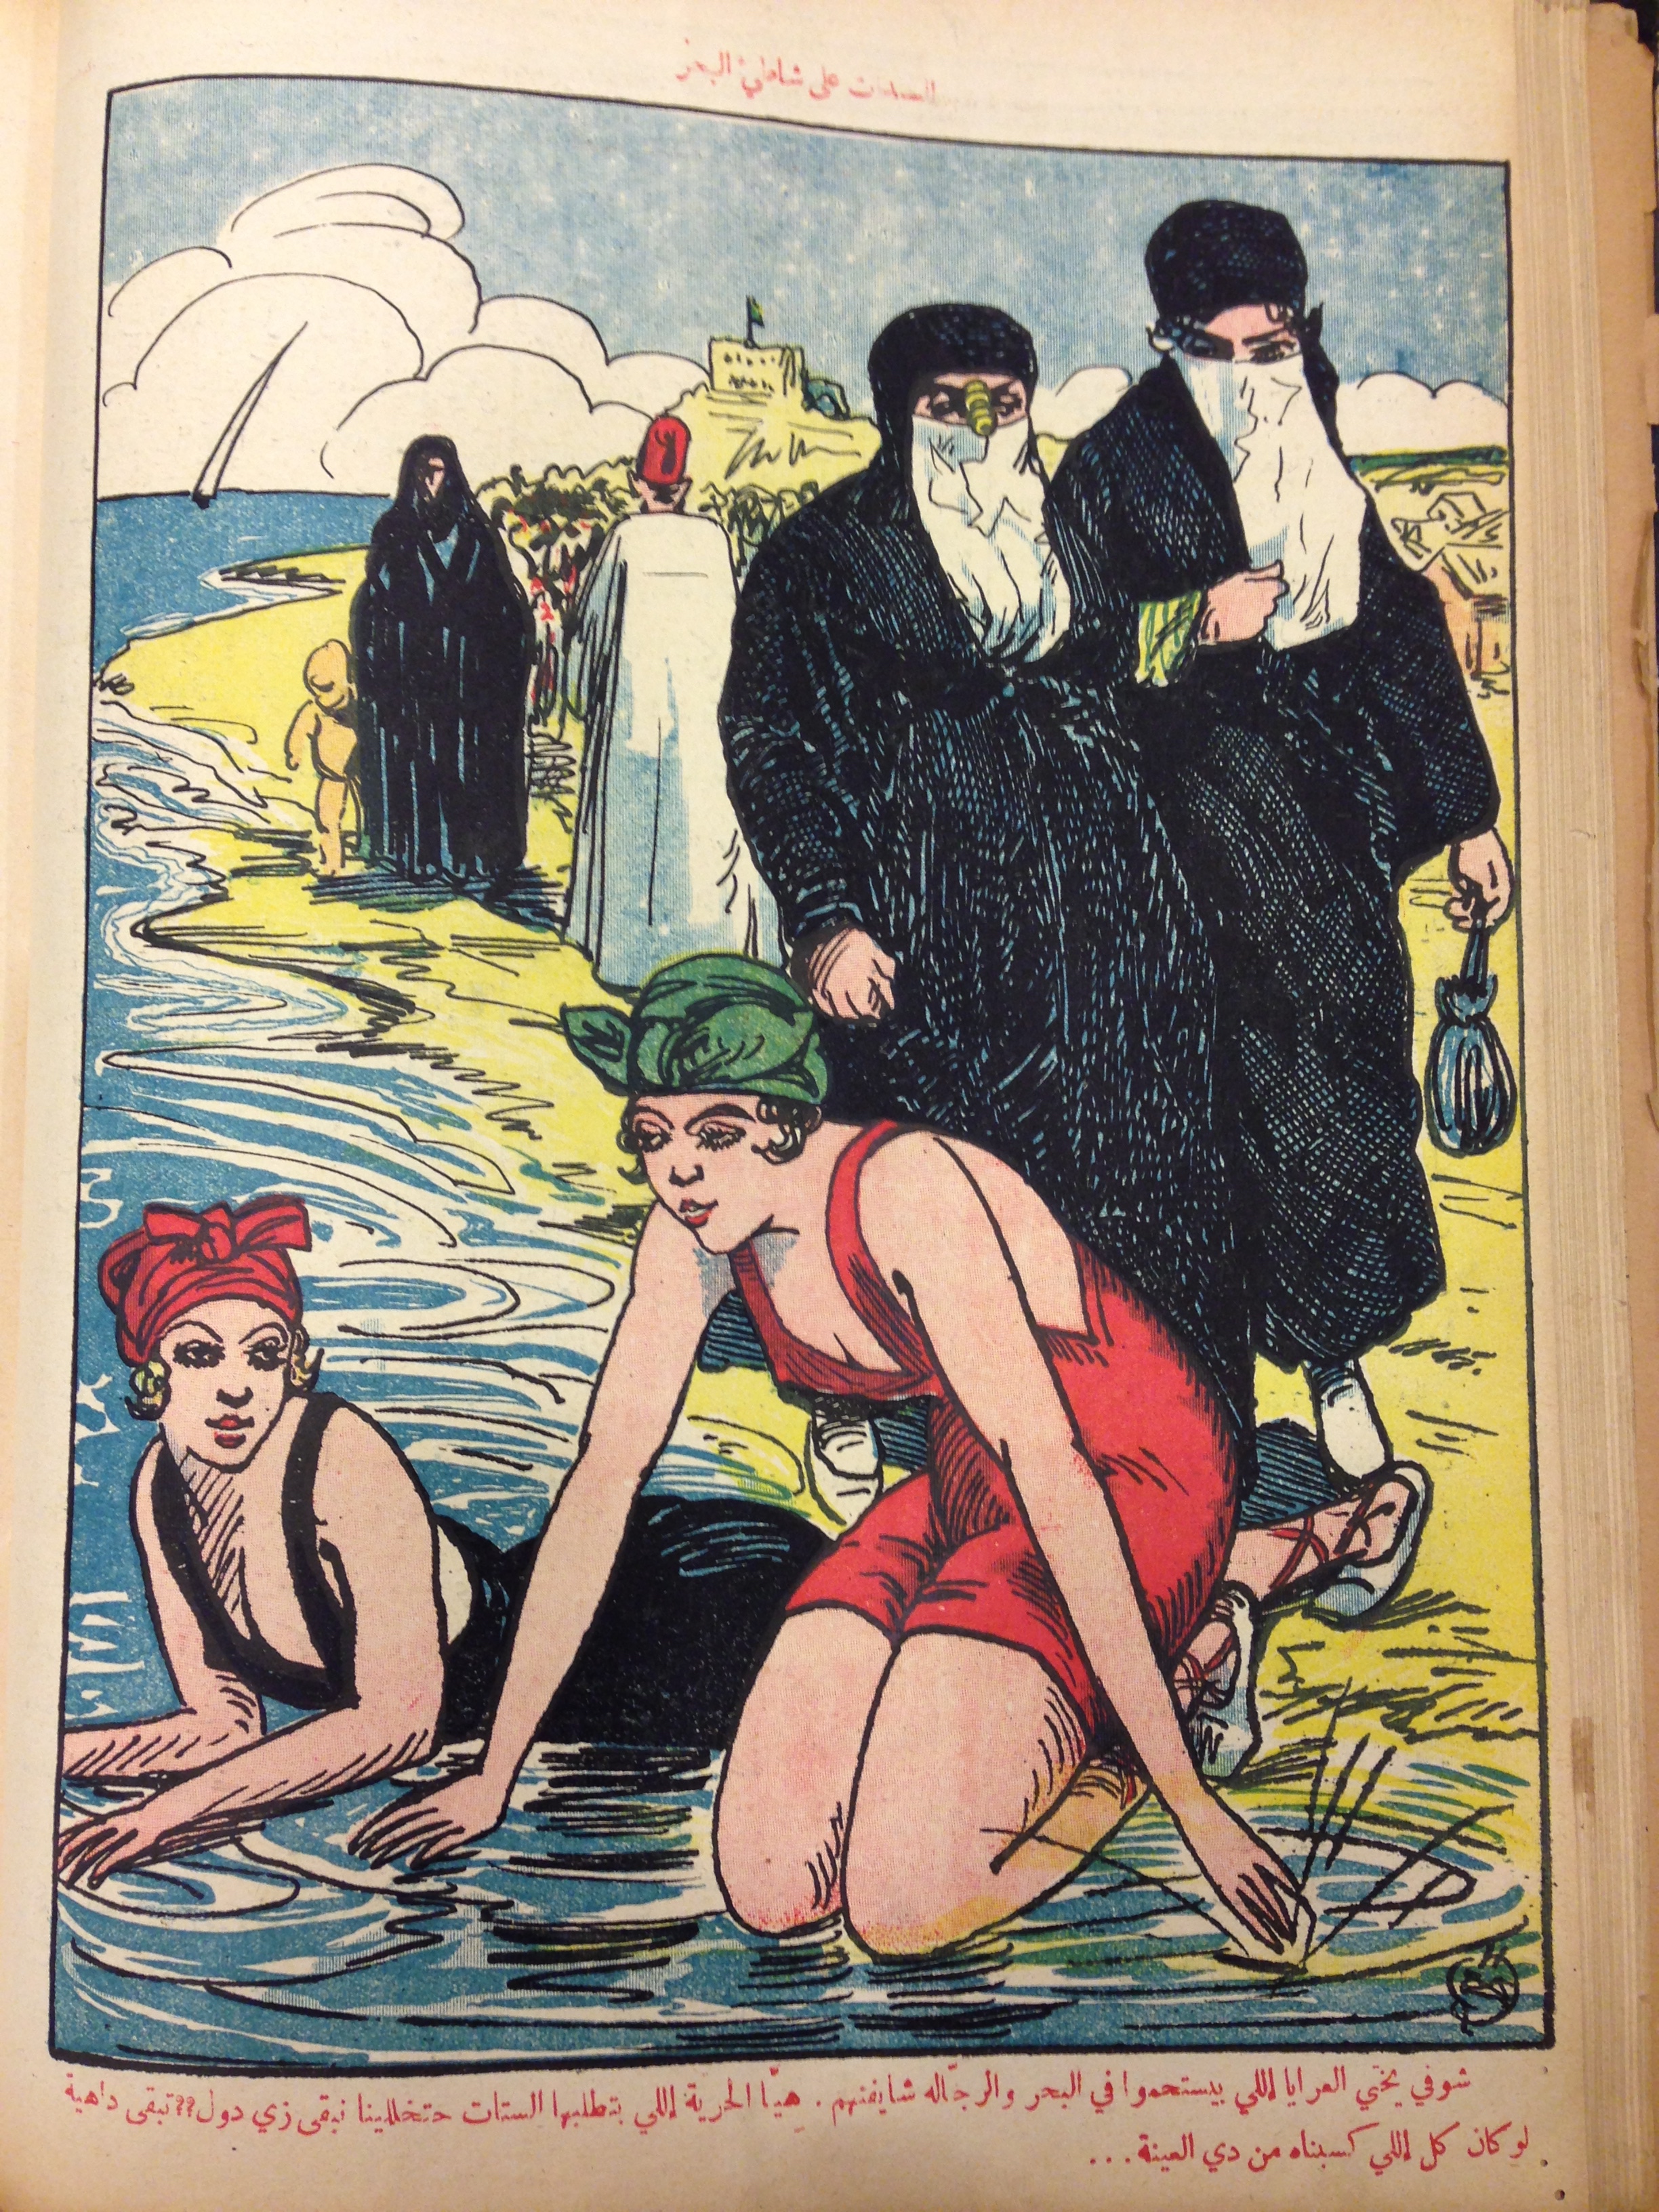 A cartoon from Al-Kashkul (Scrapbook), 1924. Women in burqa walk by and mention that they do not want freedom, if freedom means dressing like the women in swimsuits.